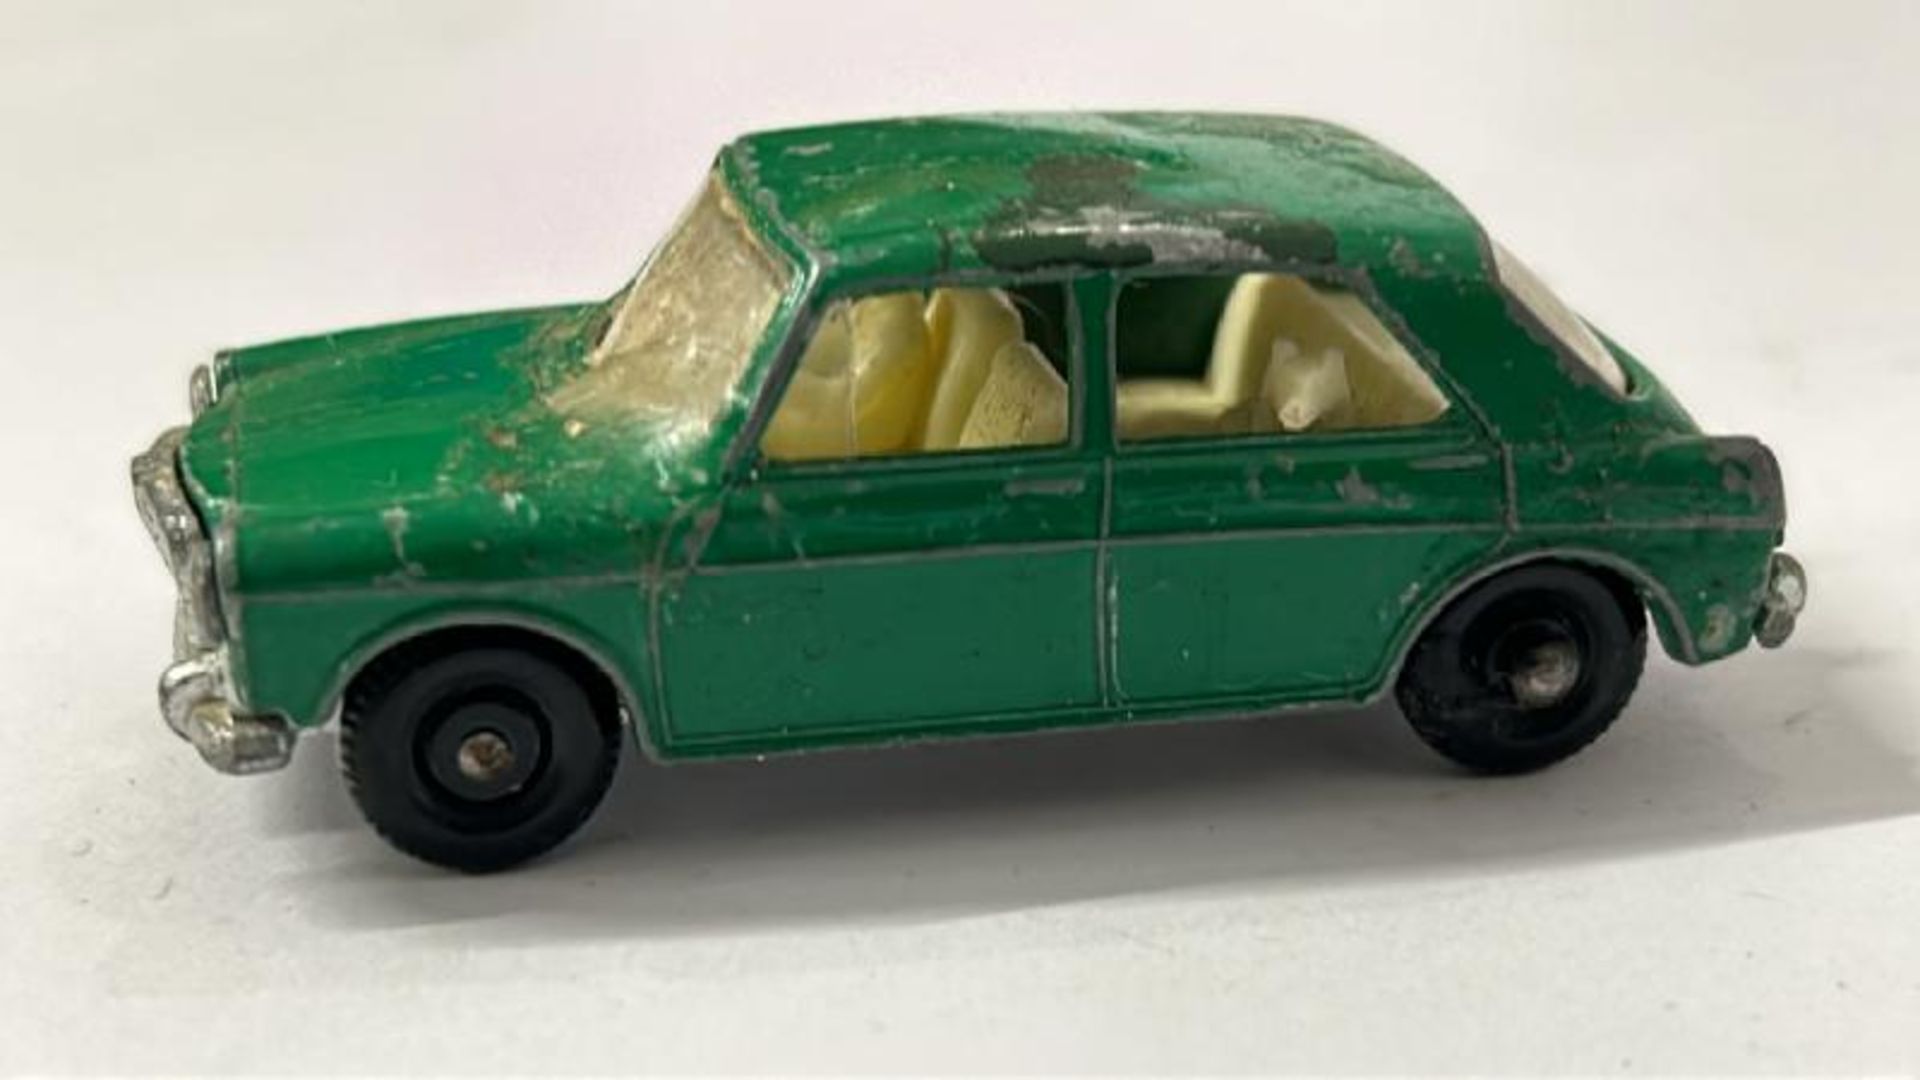 Unboxed Matchbox group including Volkswagen 1600TL no.67, Volkswagen Beatle no.25 and Ford Fire - Image 4 of 28